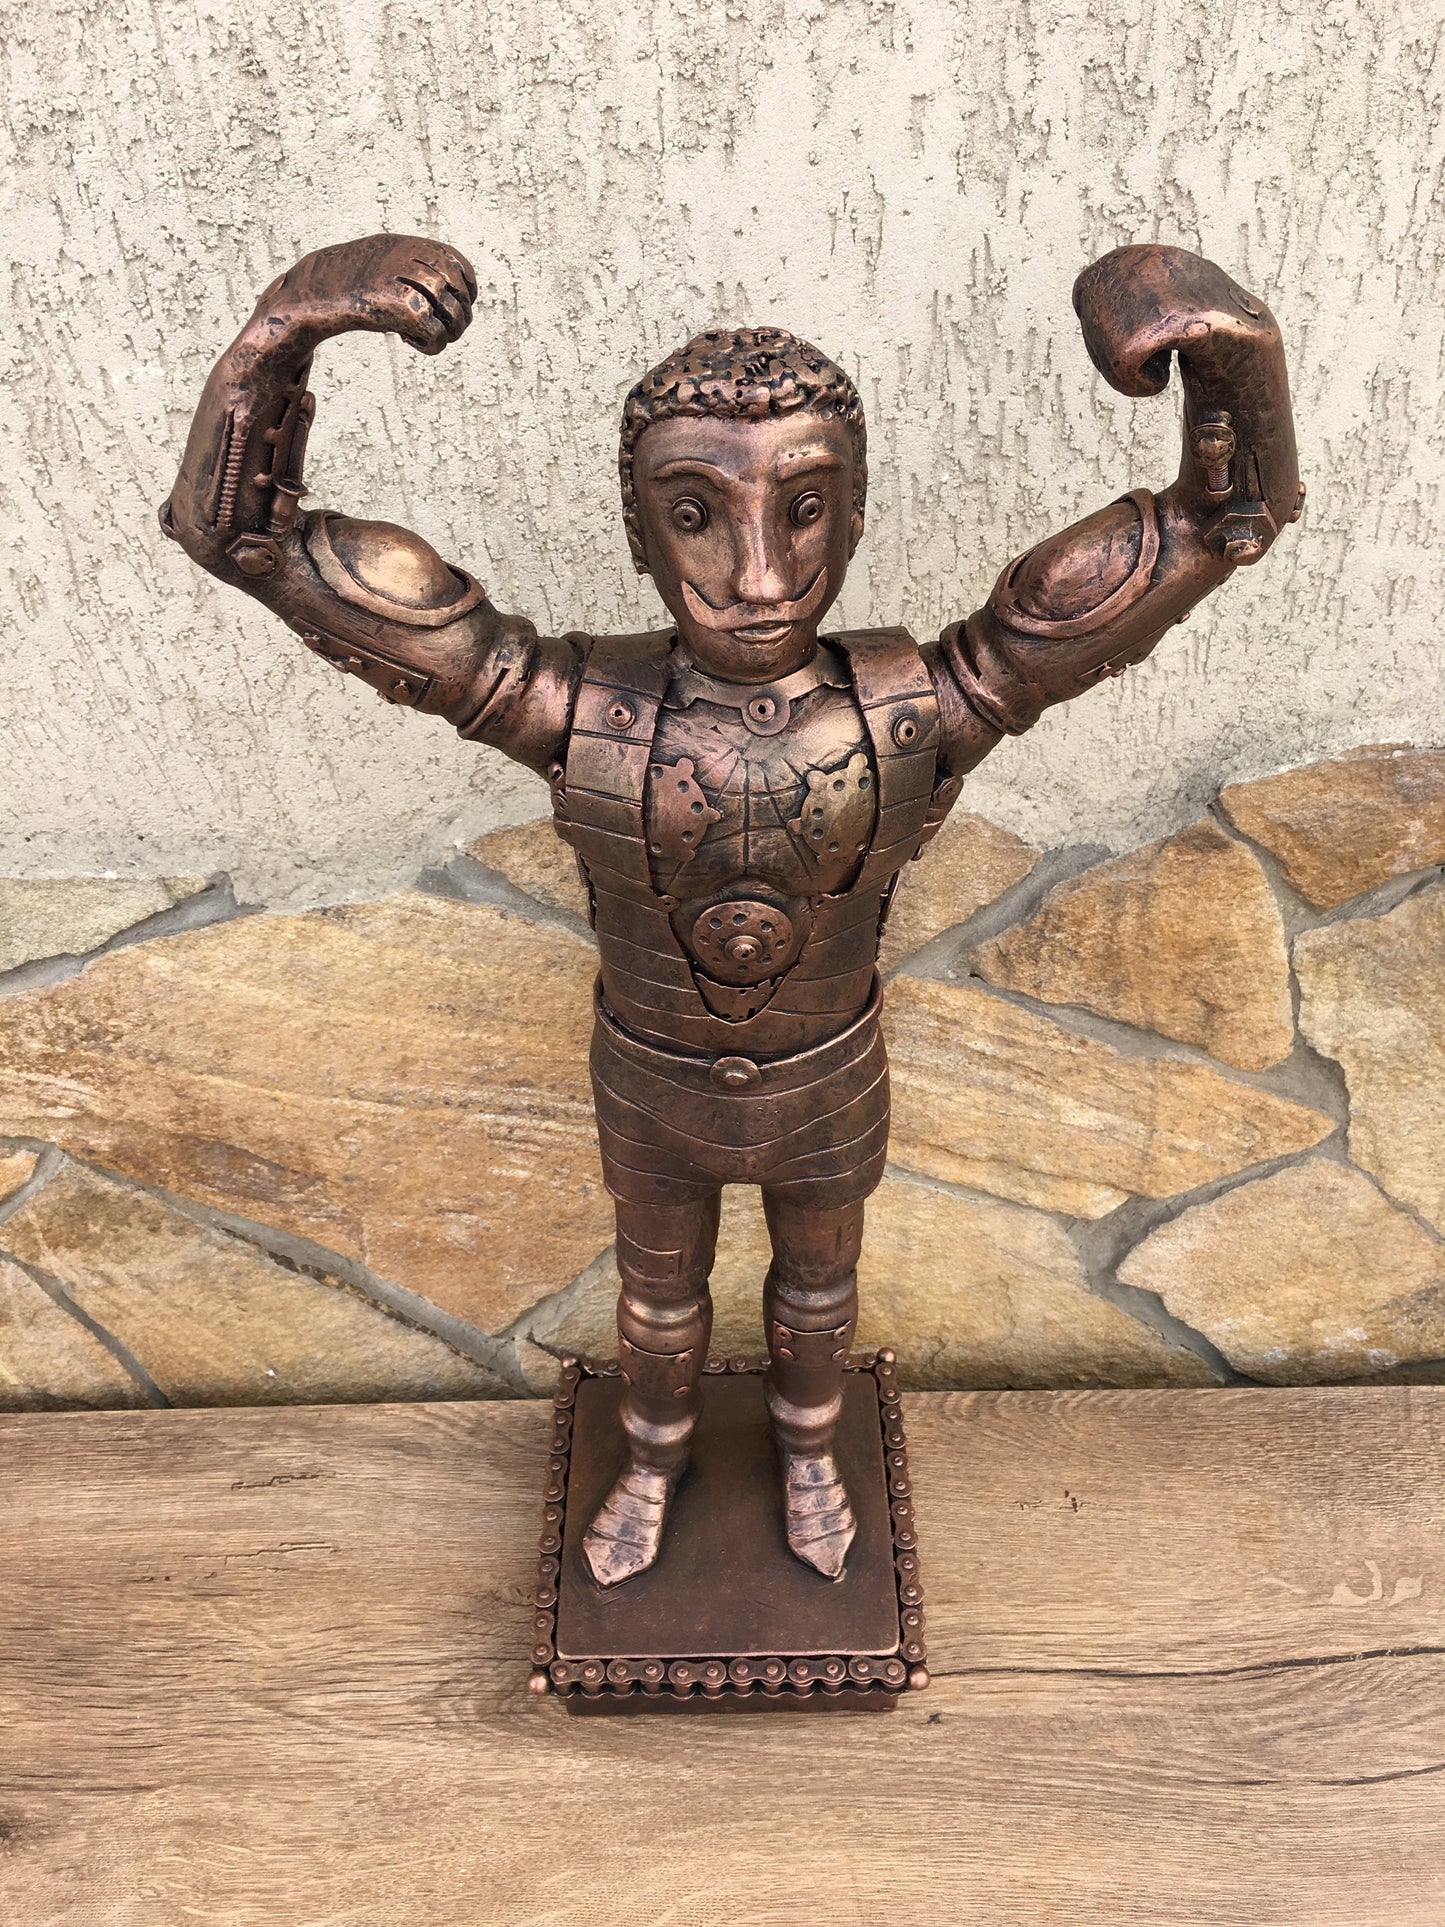 Steampunk body builder, steampunk figurine, steampunk statuette, recycled art, recycled gifts, steampunk statue, industrial gifts,viking axe